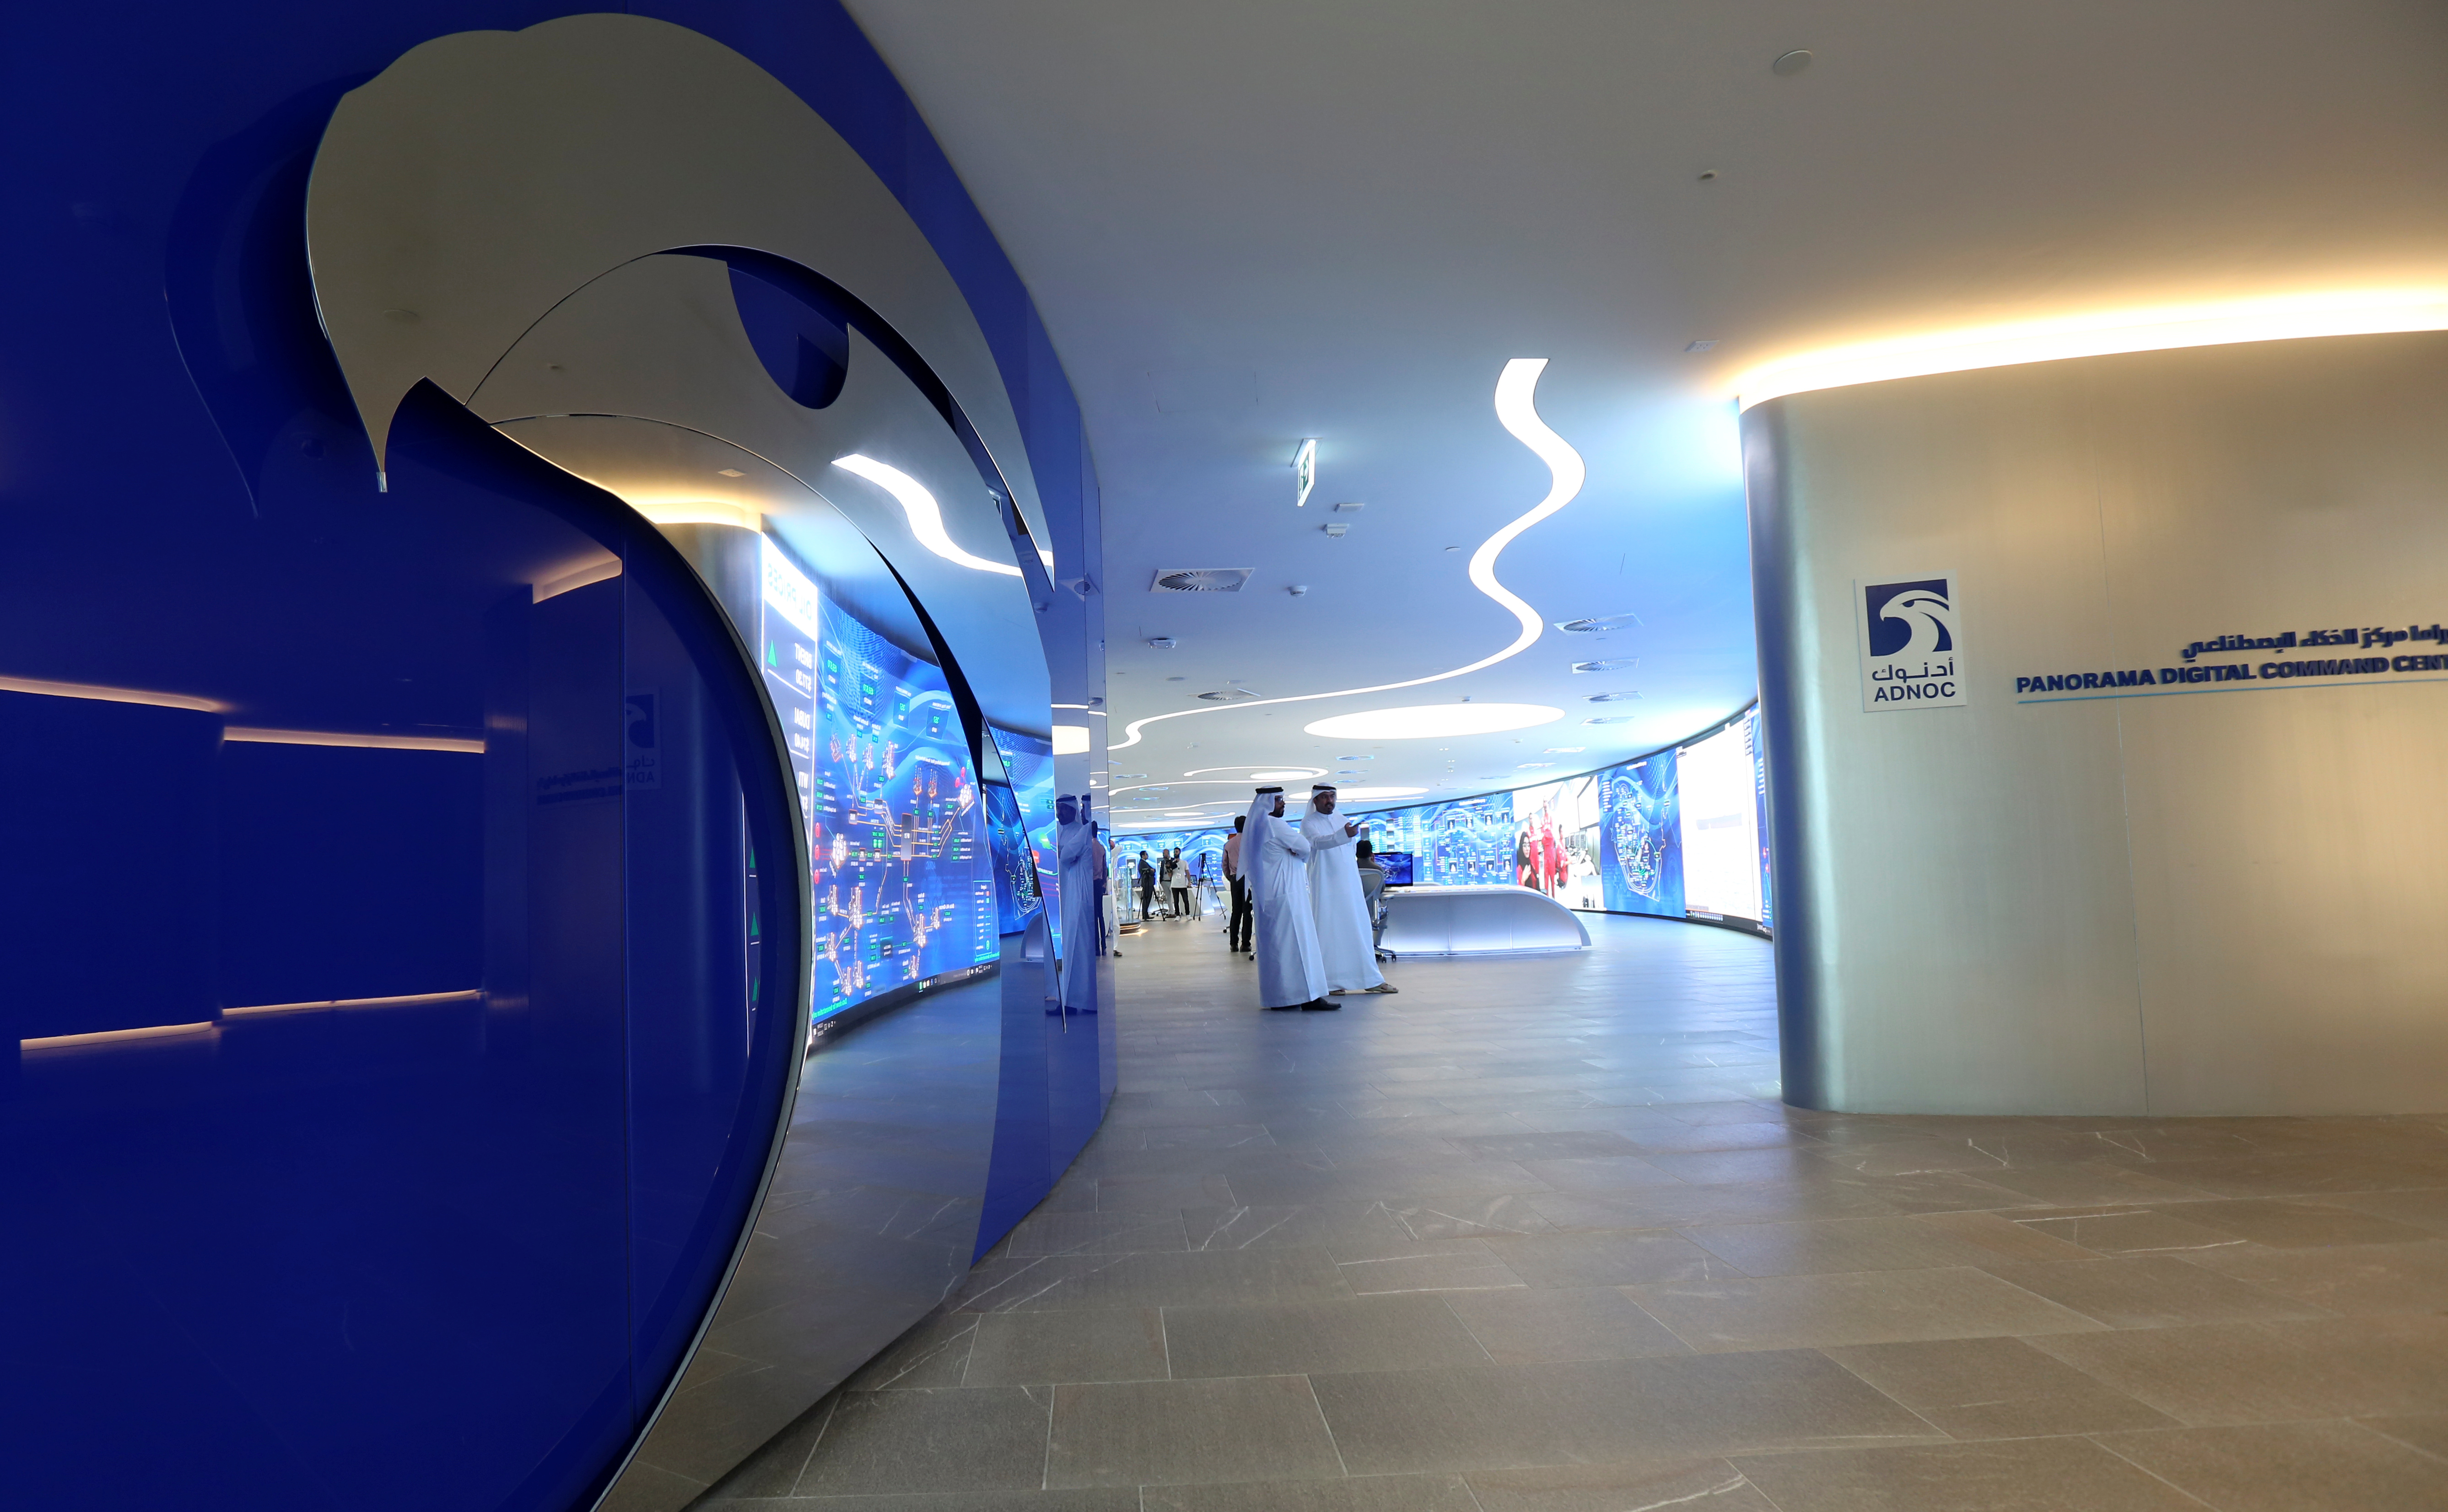 Staff are seen at the Panorama Digital Command Centre at the ADNOC headquarters in Abu Dhabi